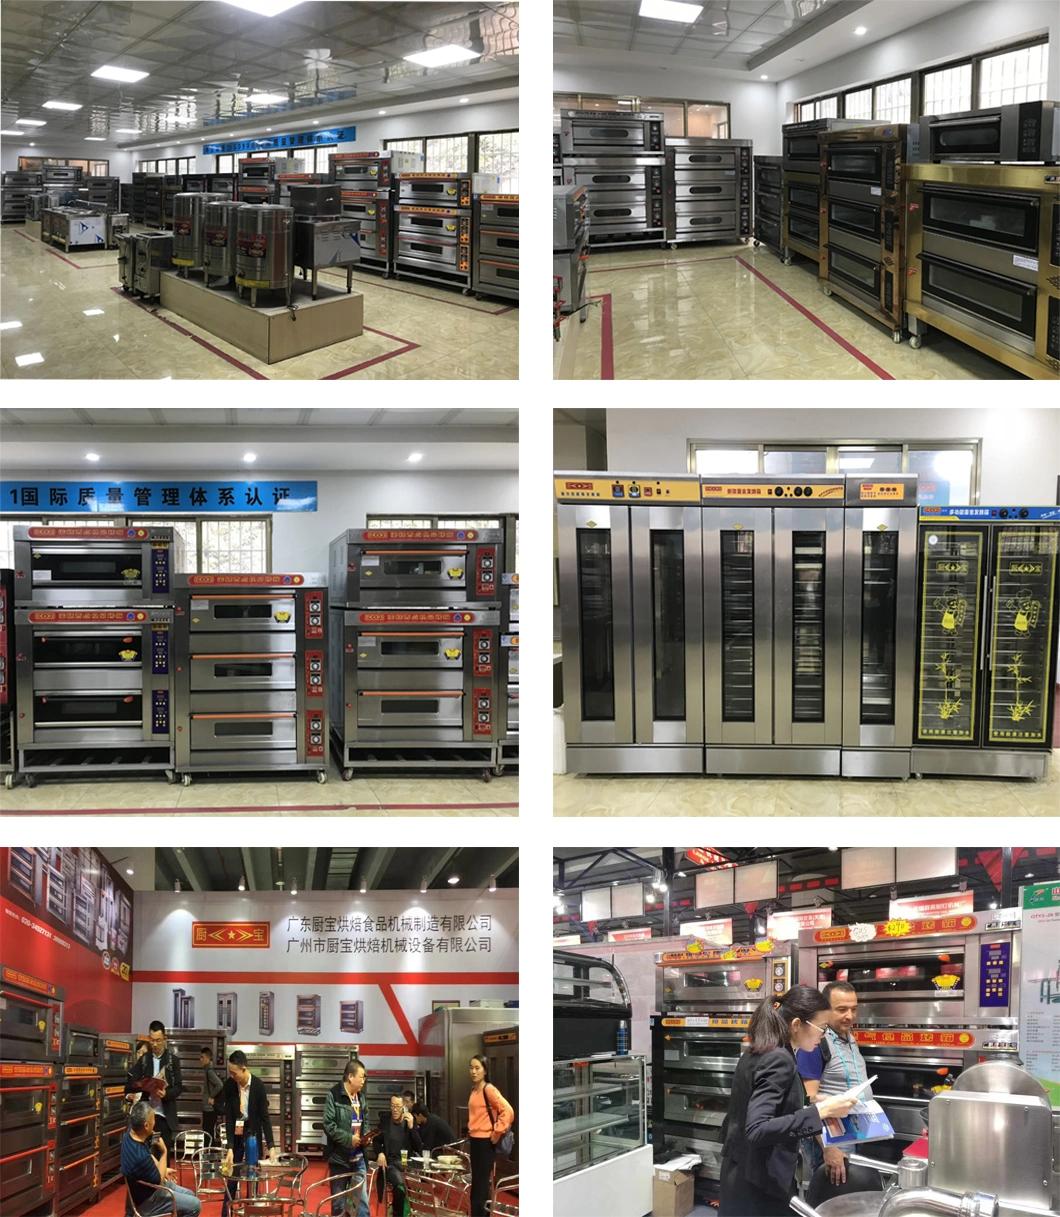 Commercial Restaurant Kitchen 1 Deck 2 Trays Gas Oven for Baking Equipment Bakery Machine Food Equipment with Computer Controller